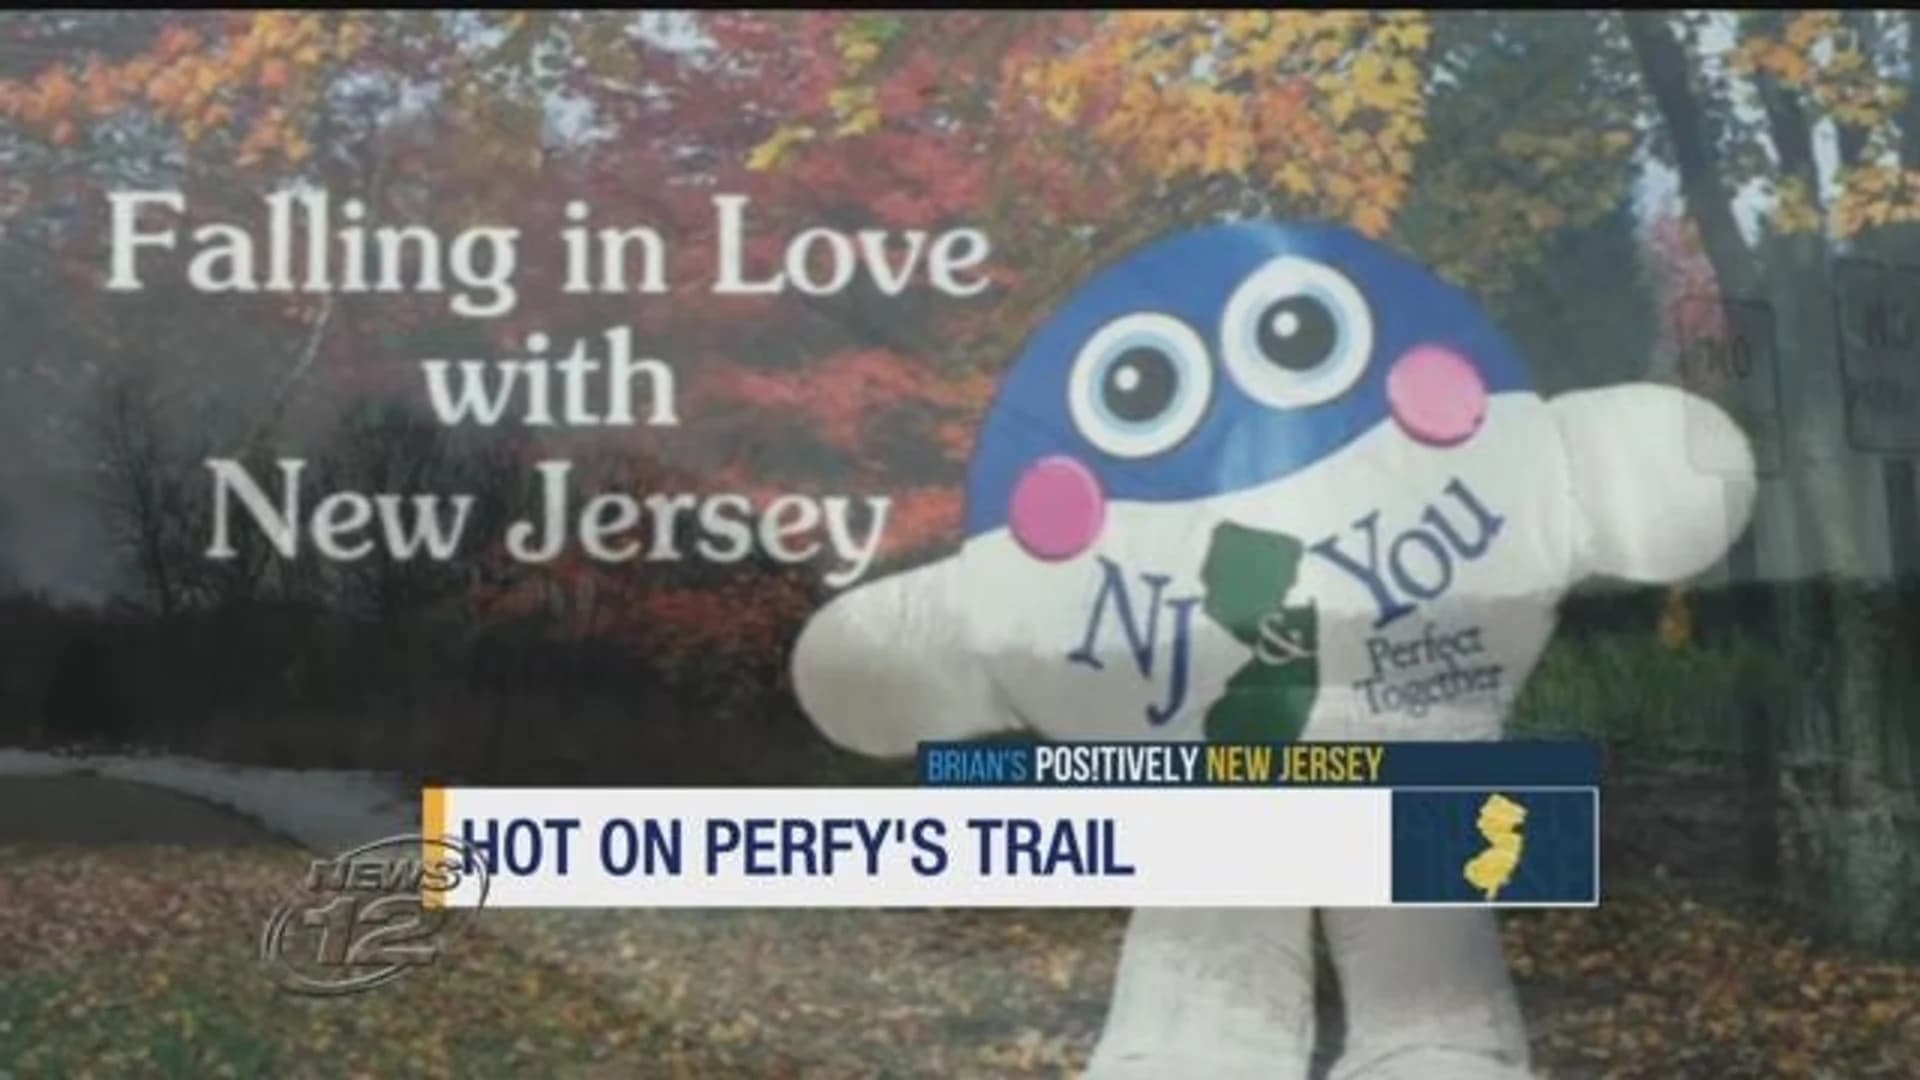 Hot on his trail: New leads in the hunt for former New Jersey mascot Perfy